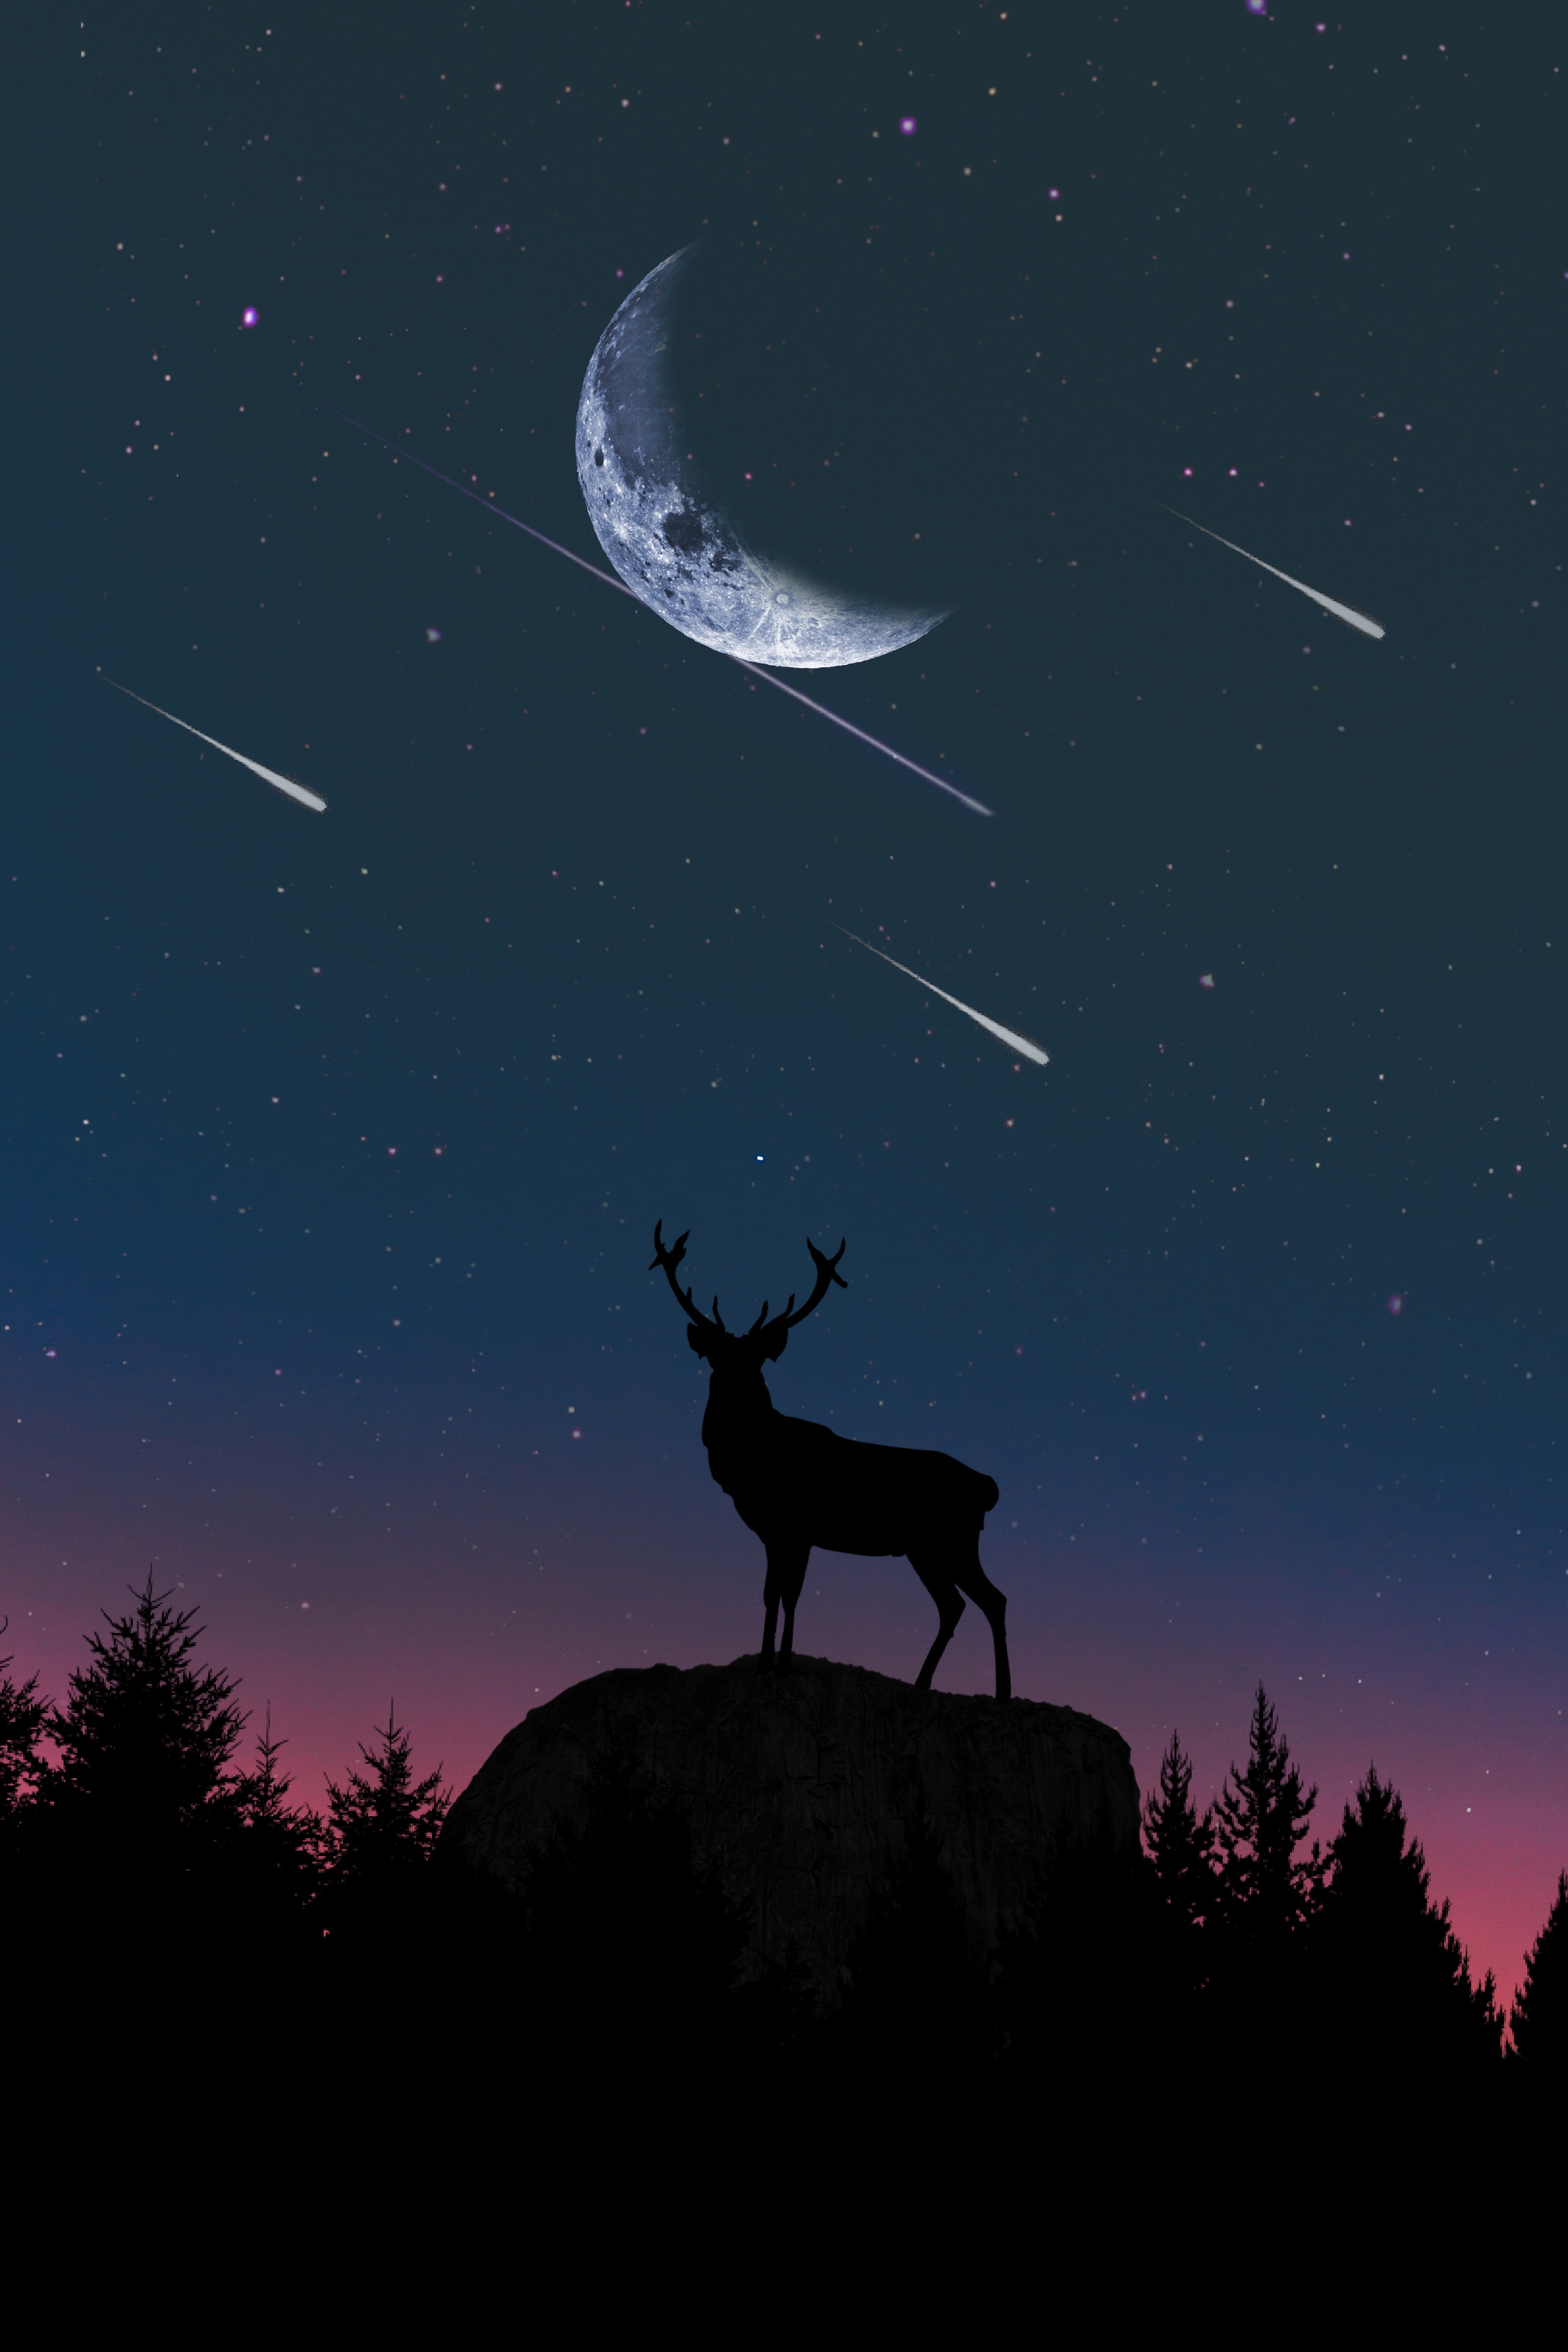 Free photo Silhouette of a deer against the night sky with shooting stars